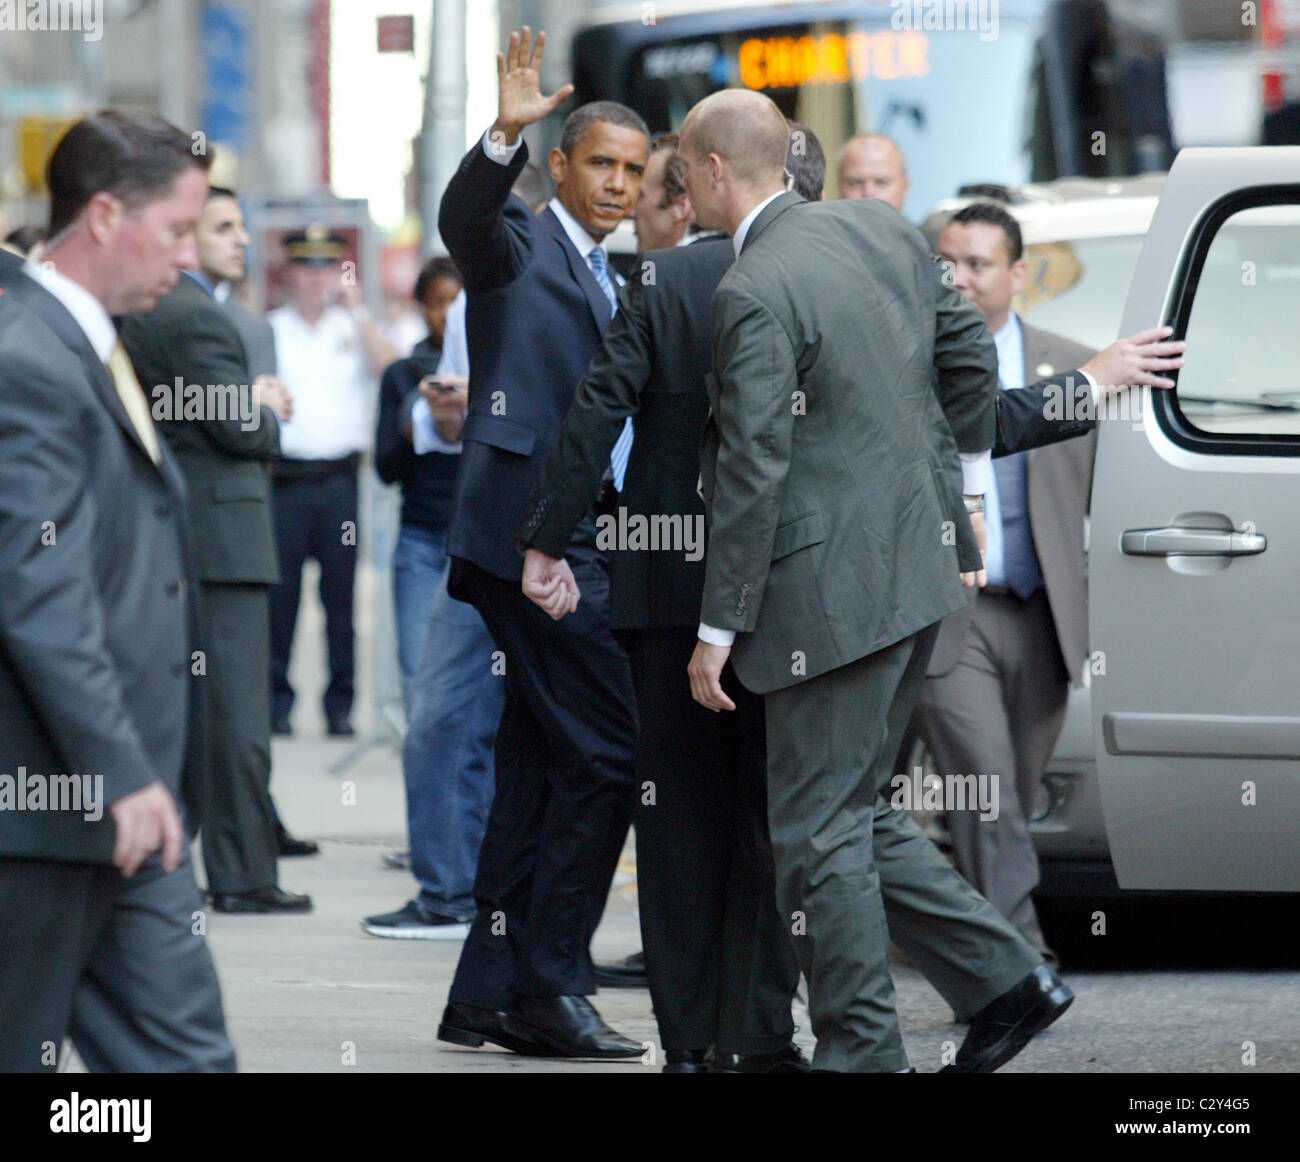 Barack Obama outside the Ed Sullivan Theater for the 'Late Show With David Letterman' New York City, USA - 10.09.08 Stock Photo